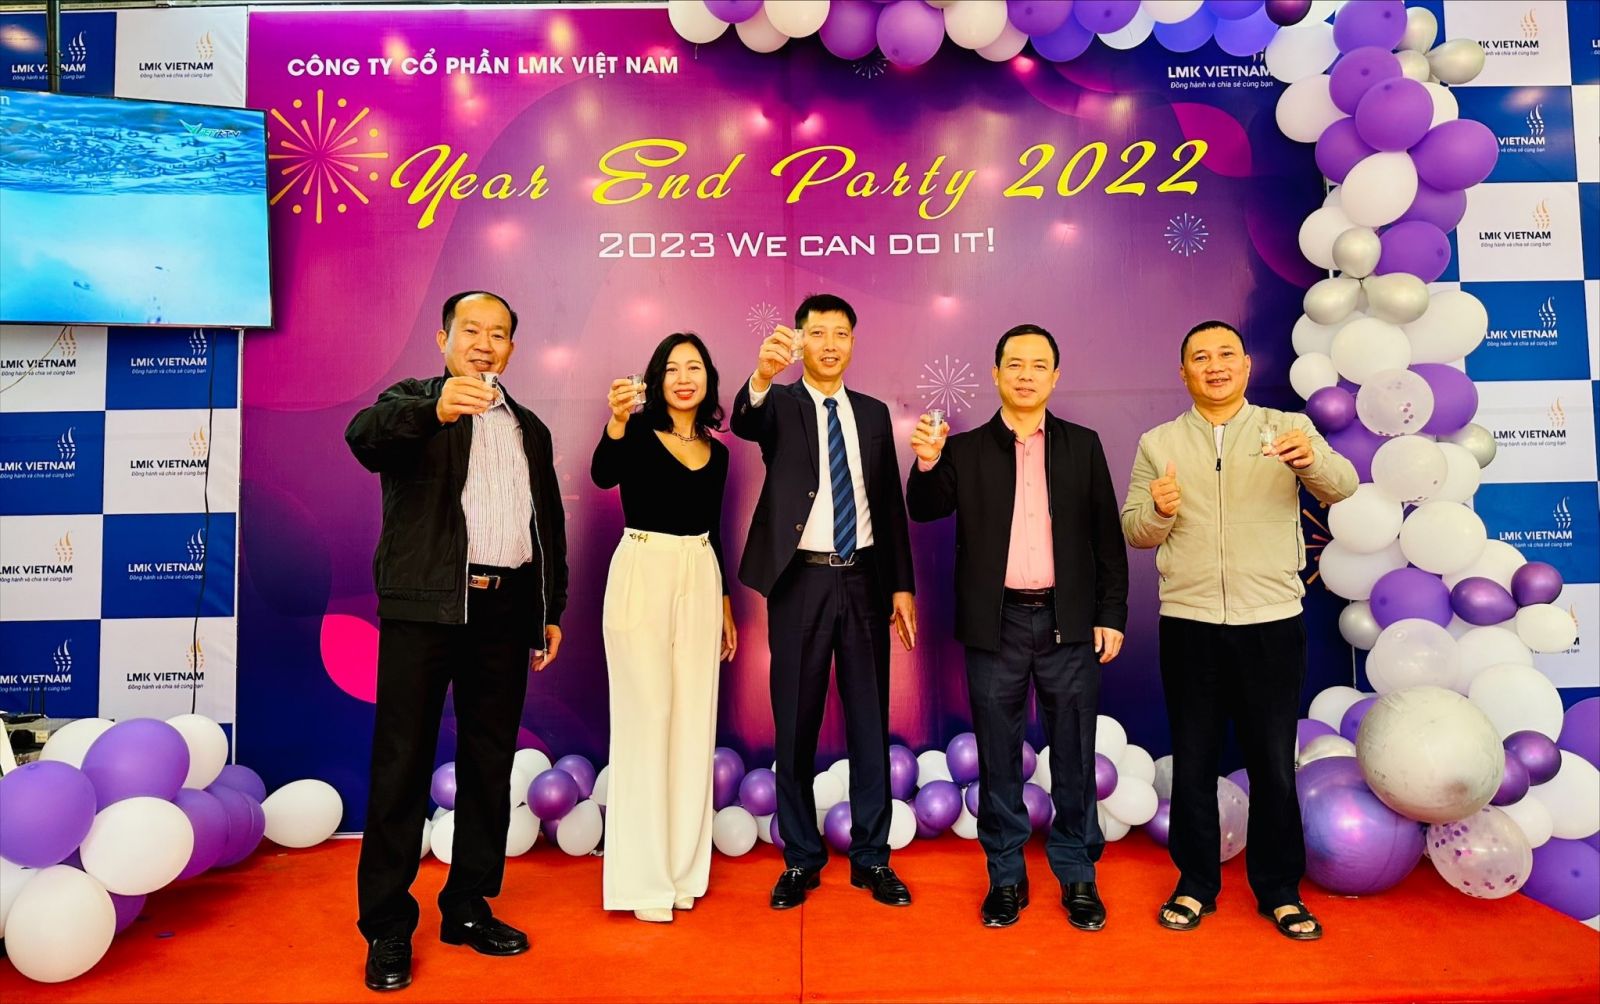 Year end party 2022